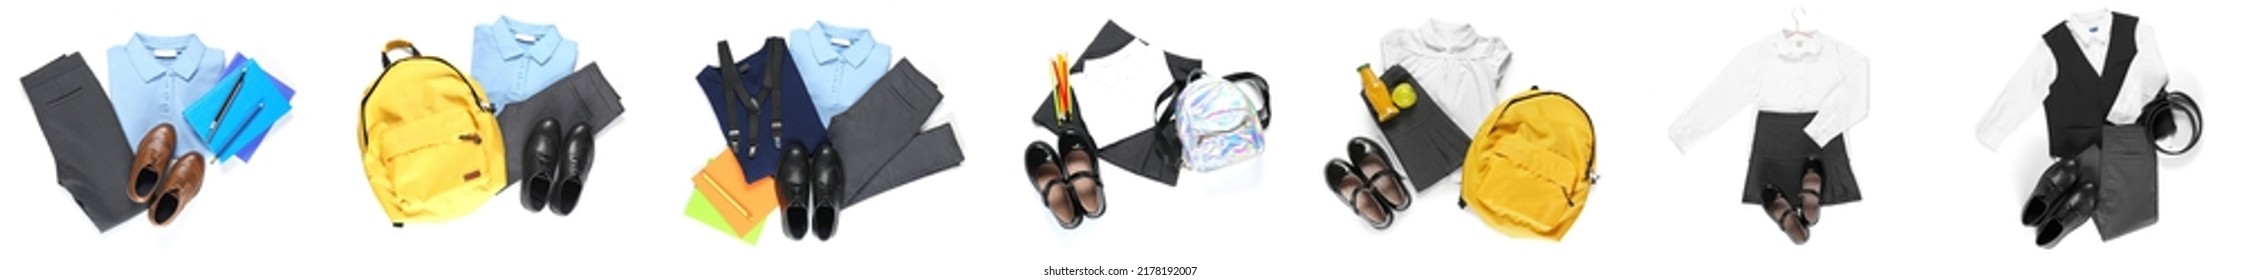 Collage of stylish school uniform on white background, top view